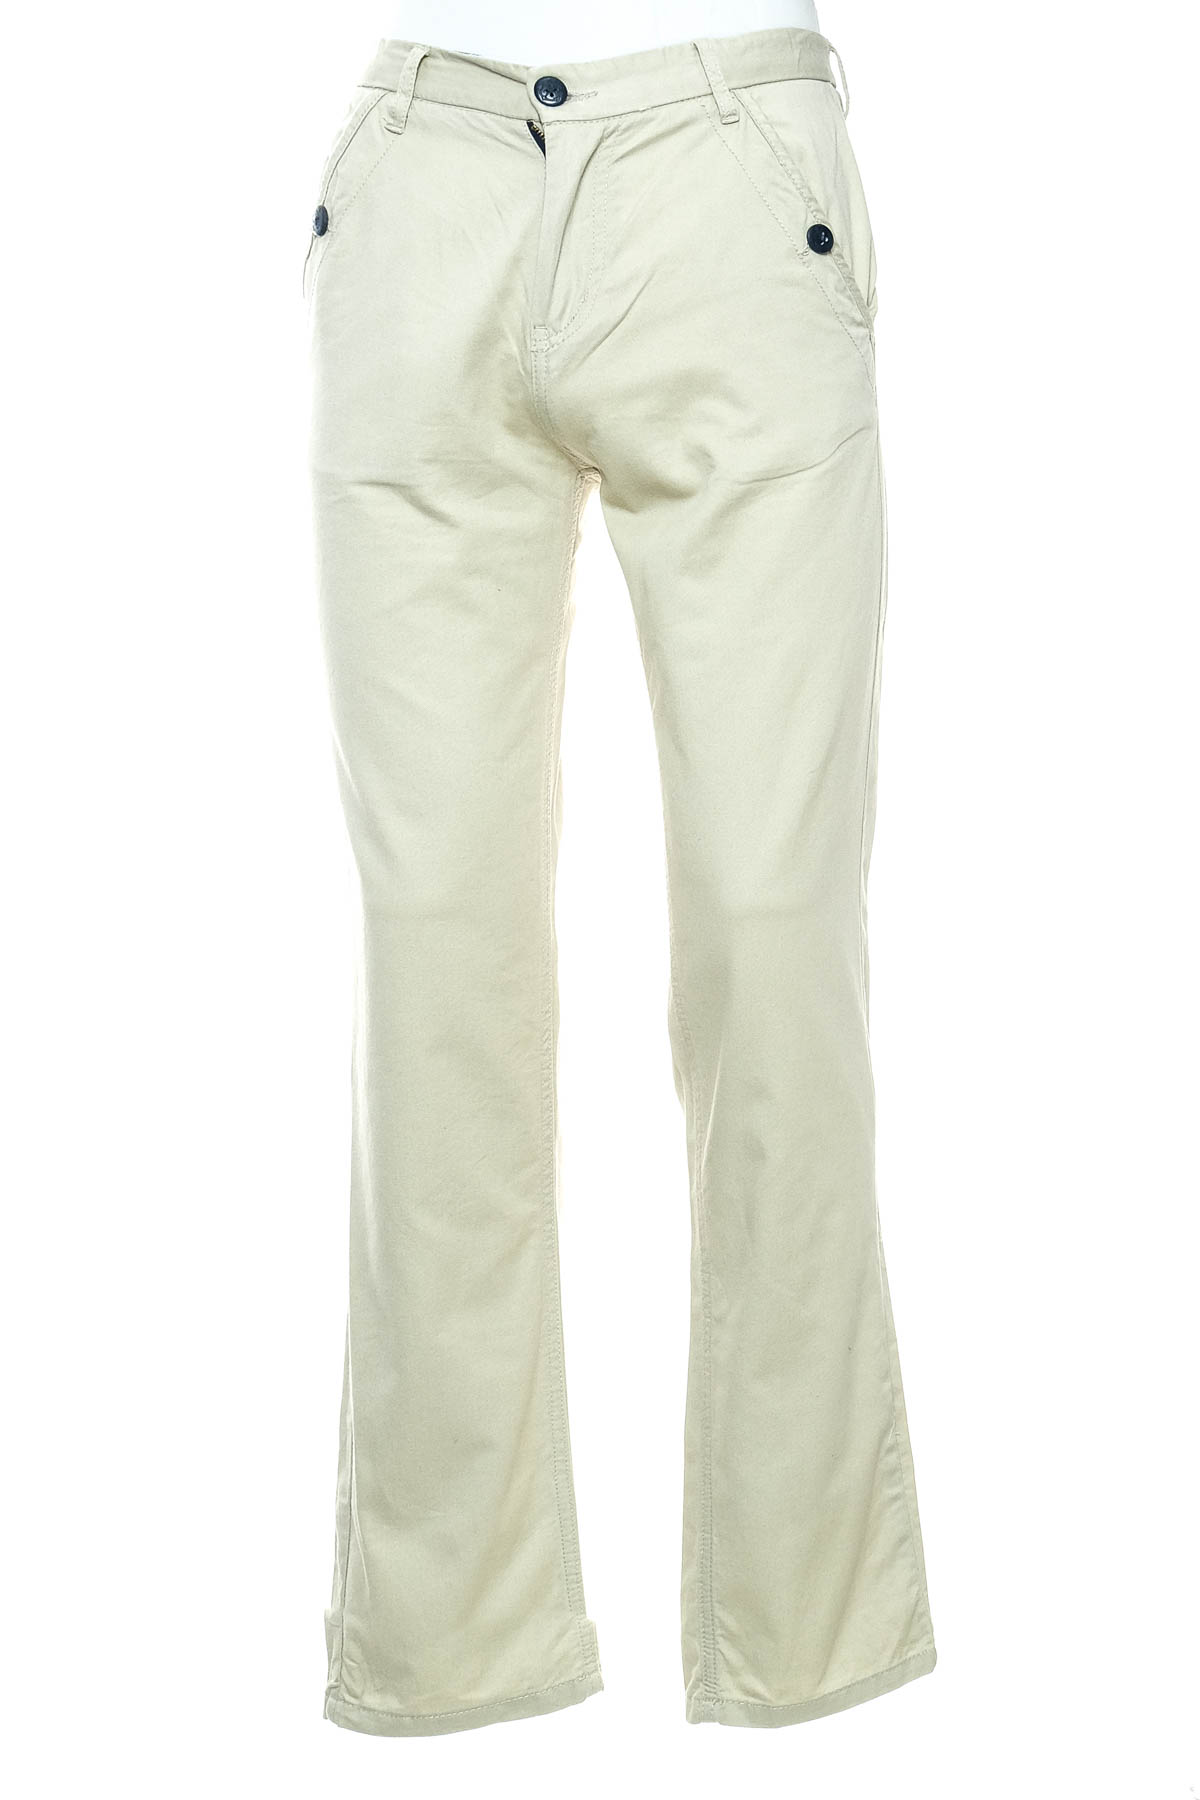 Trousers for boy - Faberlic - 0